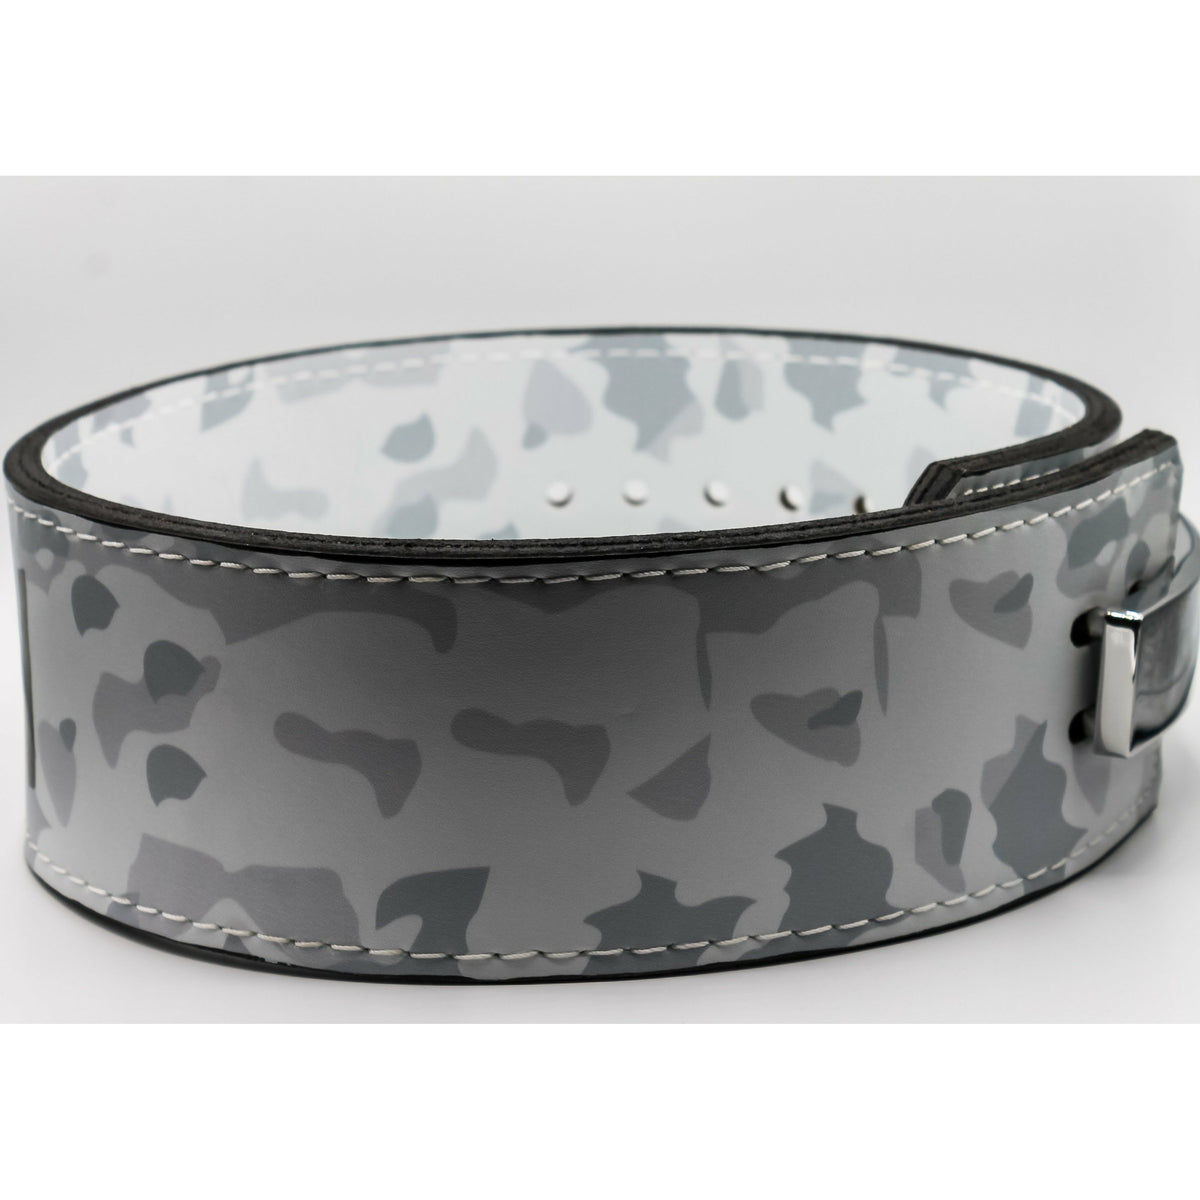 Inaka Power Lever Weightlifting Belt Gray Camo SIZE SMALL